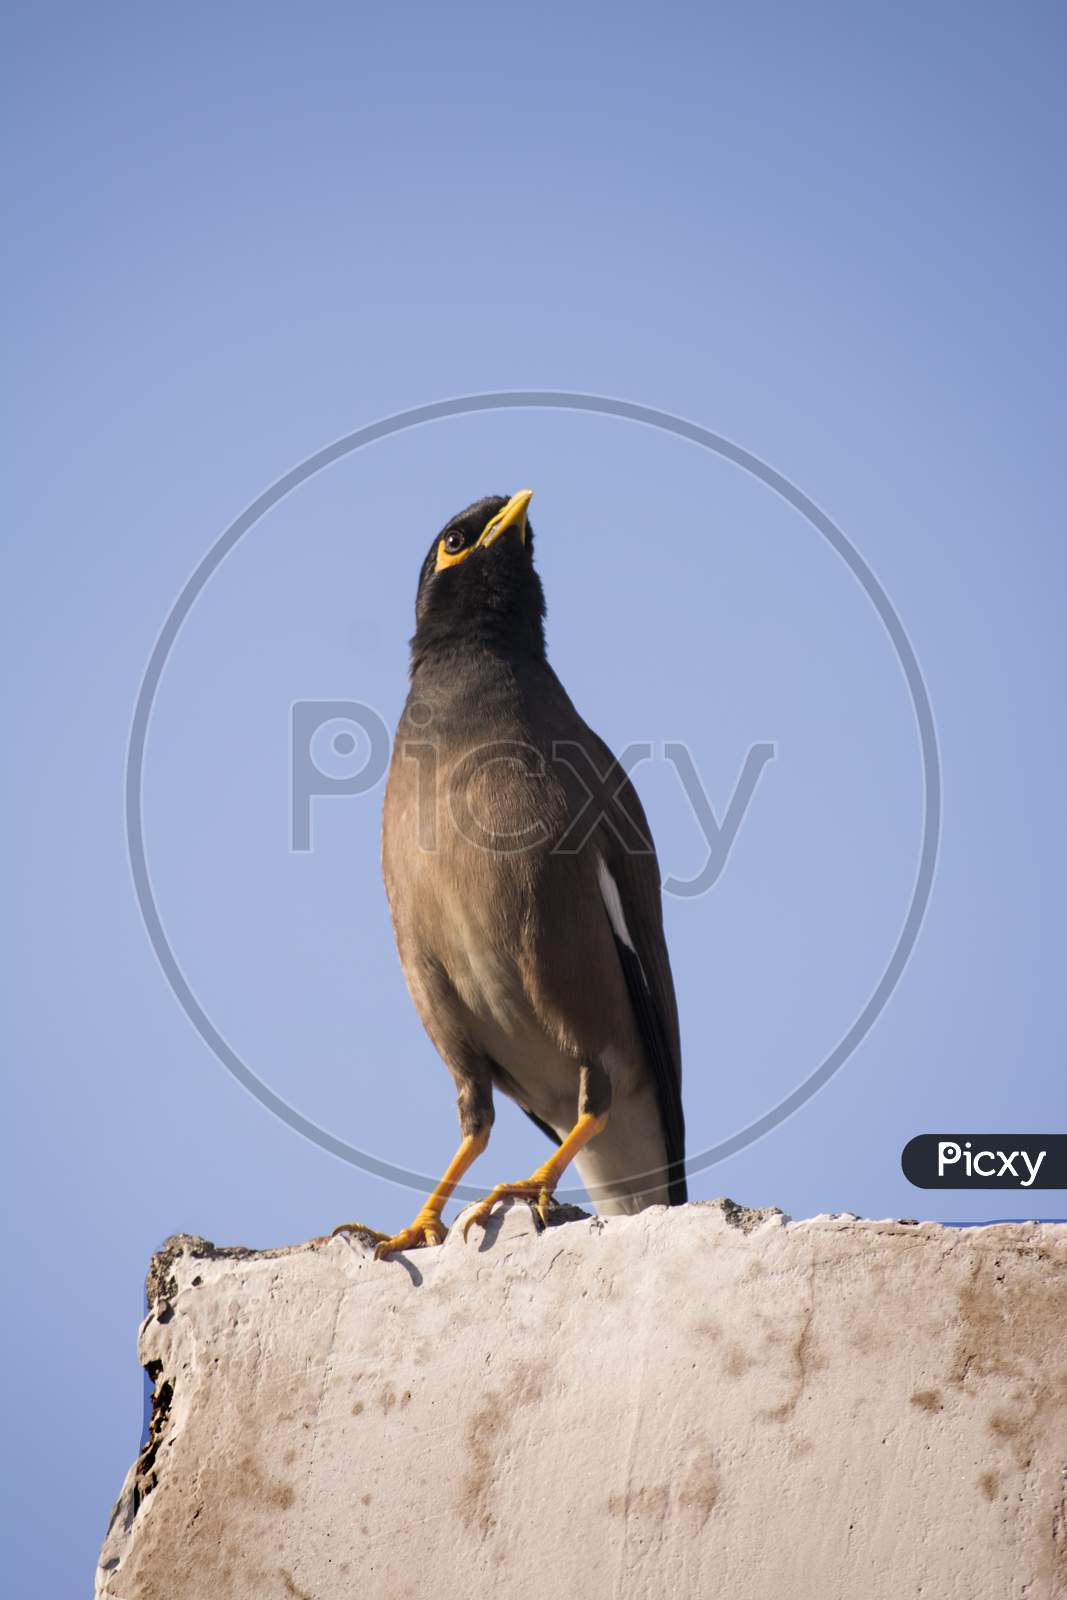 Common Myna (Acridotheres Tristis) Black Singing Indian Bird With Yelllow Eyes And Legs Sitting On Wall Looking At Sky. Low Angle Shot.